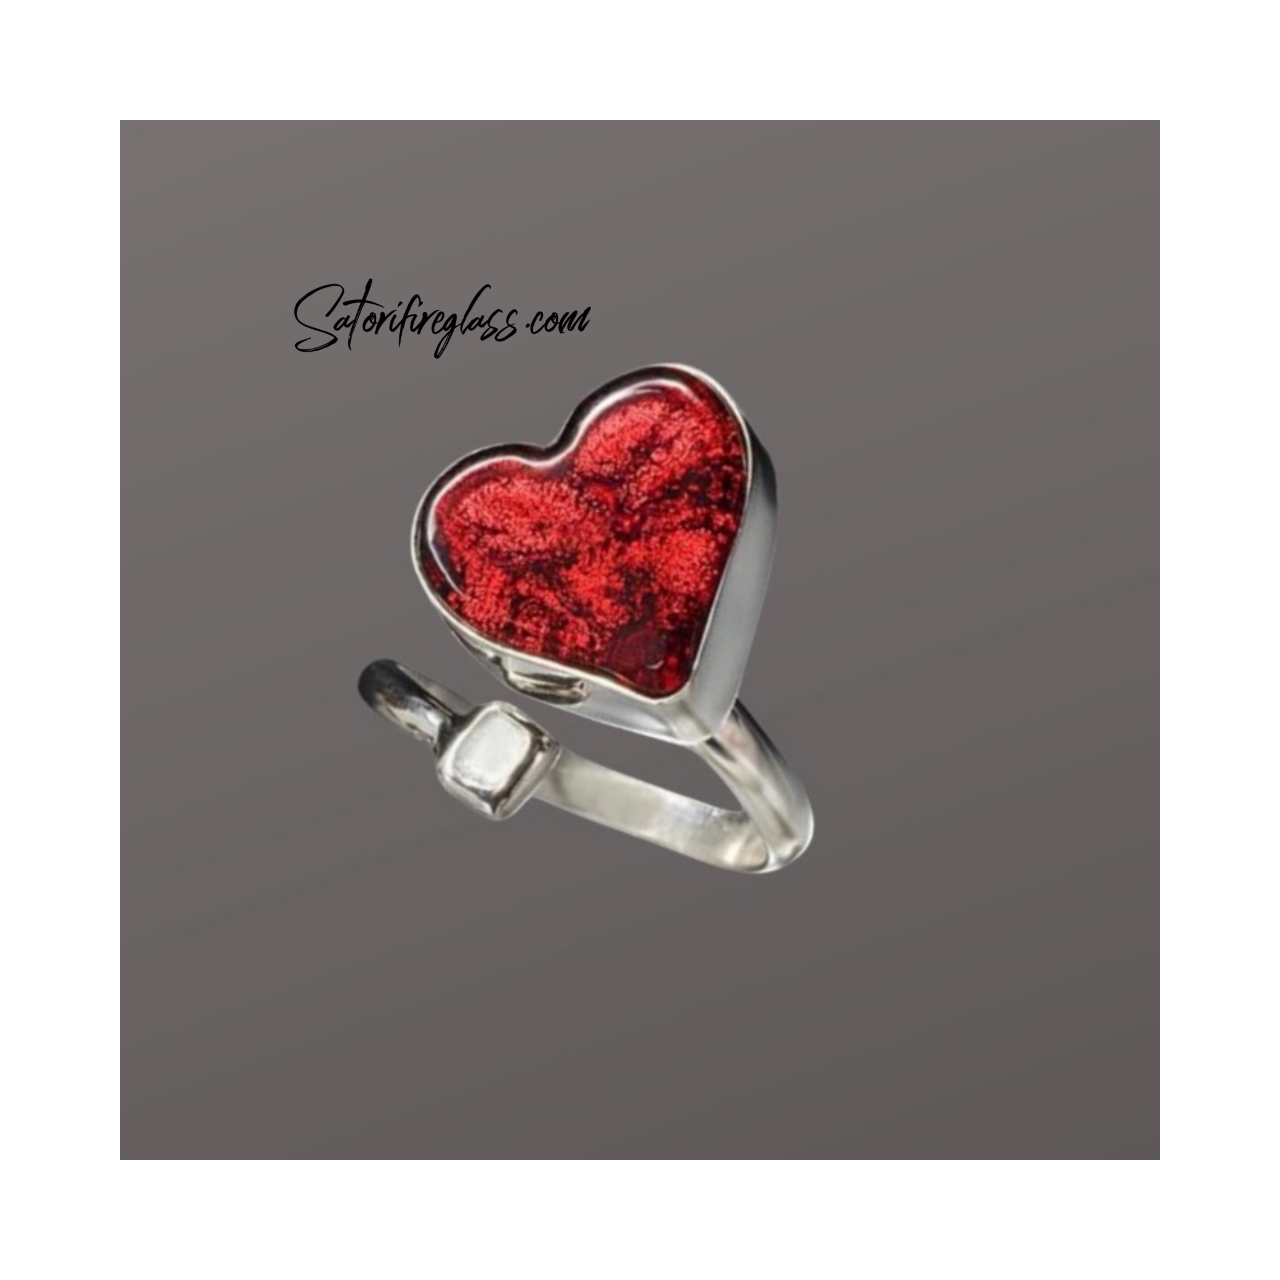 Red Heart Ring Set In Sterling